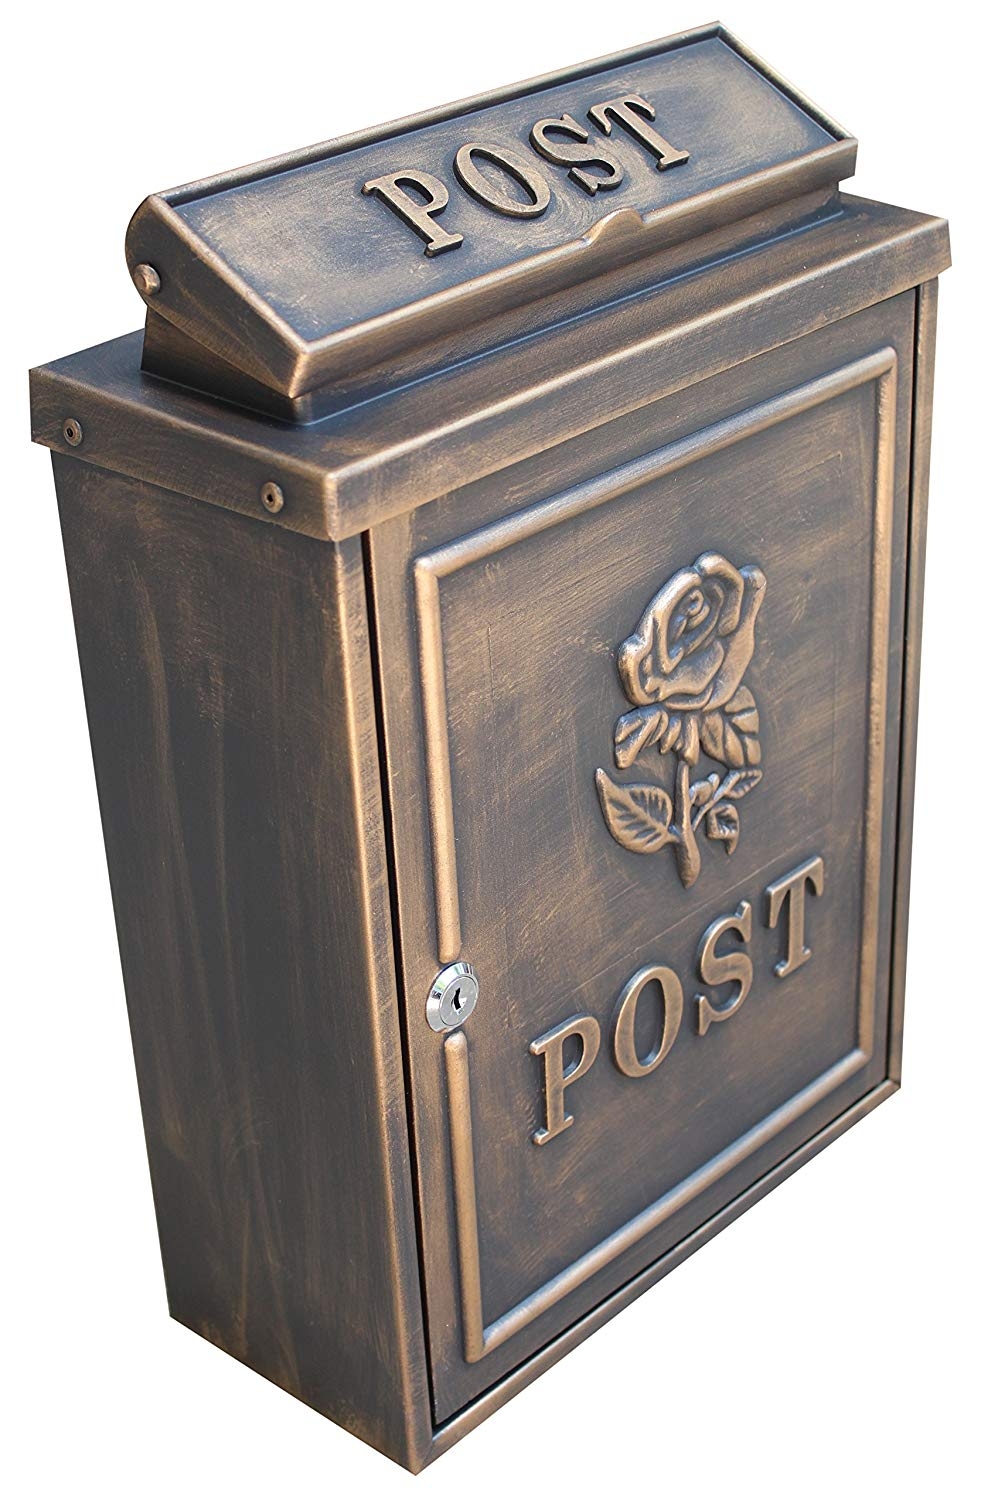 Locking Wall Mounted Mailbox - Bronze Vintage Rose Design - Locking Rustic Metal Mail Box - Residential Decorative Security Letter Box